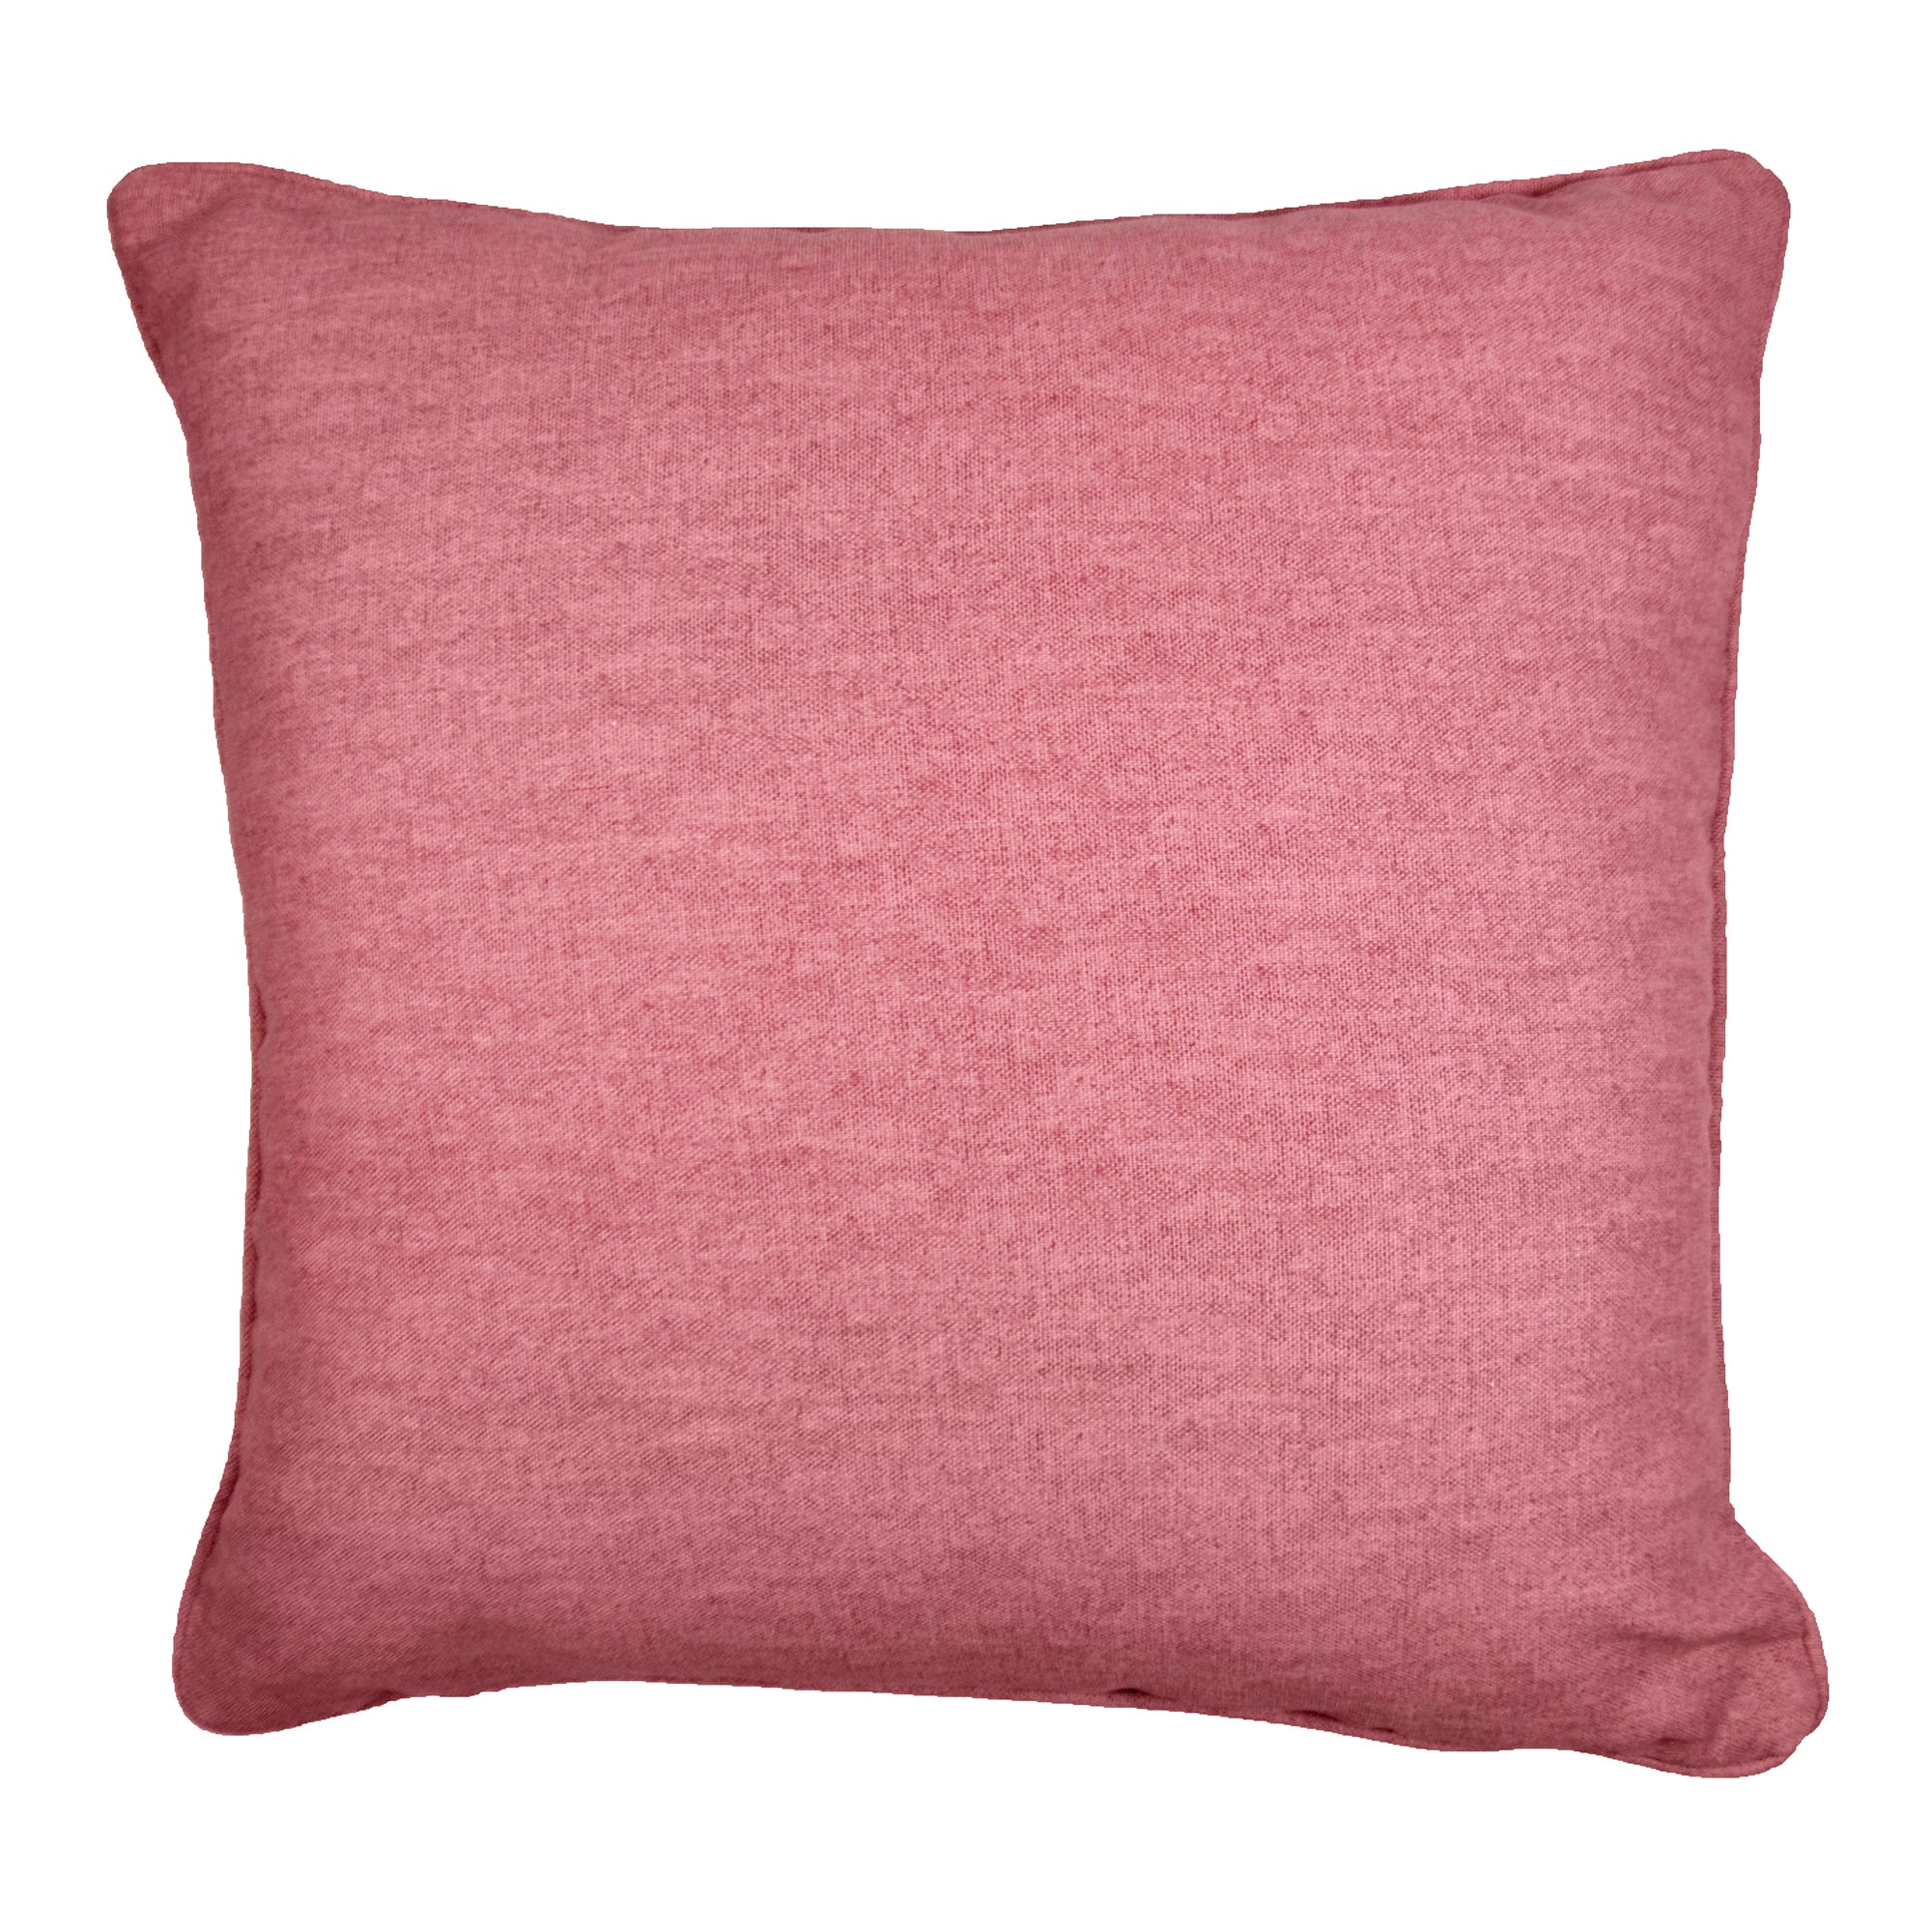 Sorbonne - 100% Cotton Filled Cushion in Blush - by Fusion